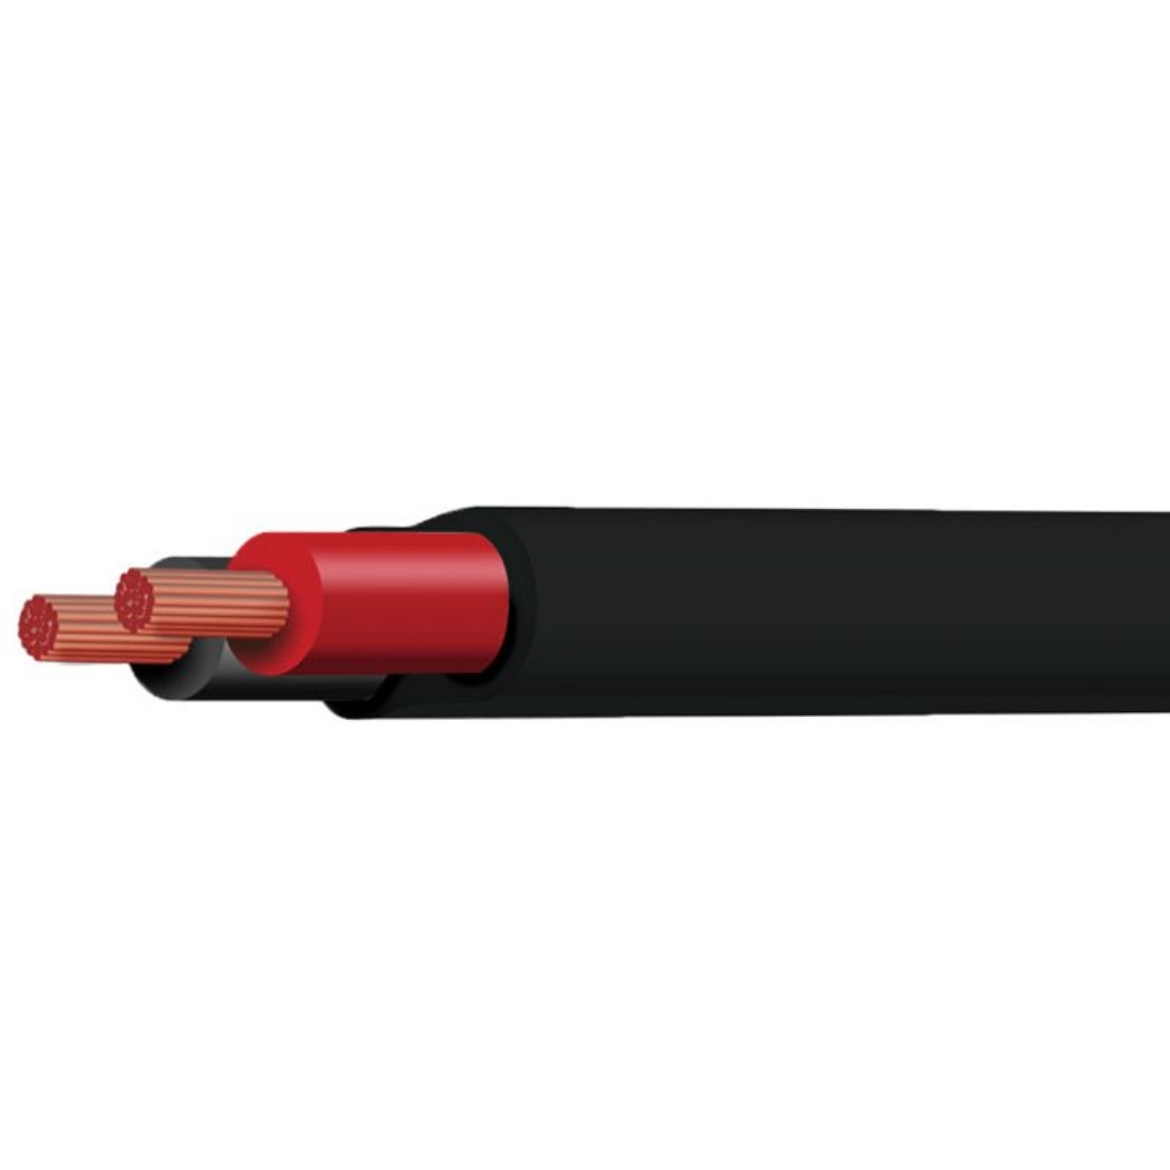 Picture of TYCAB 5MM TWIN CORE CABLE 29A TWIN SHEATH BLACK/RED - 30M ROLL